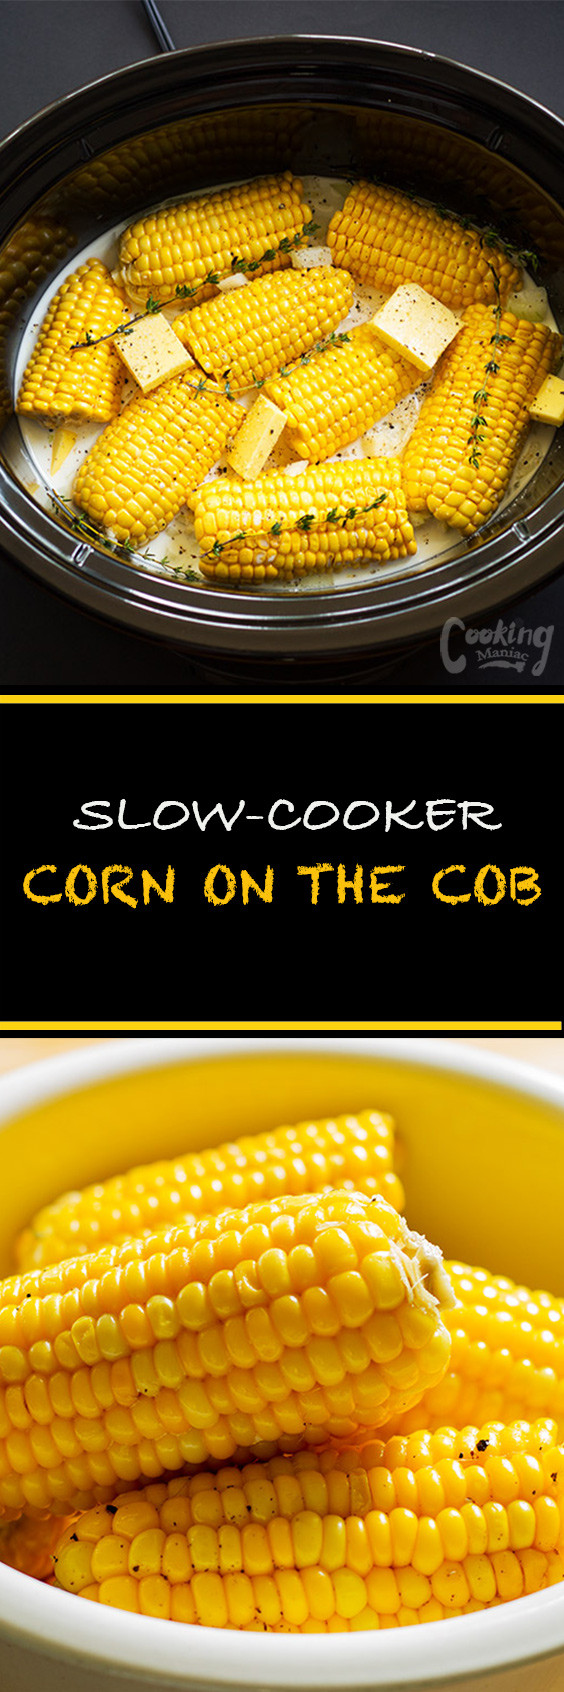 Slow Cooker Corn On The Cob
 Slow Cooker Corn on the Cob Cooking Maniac